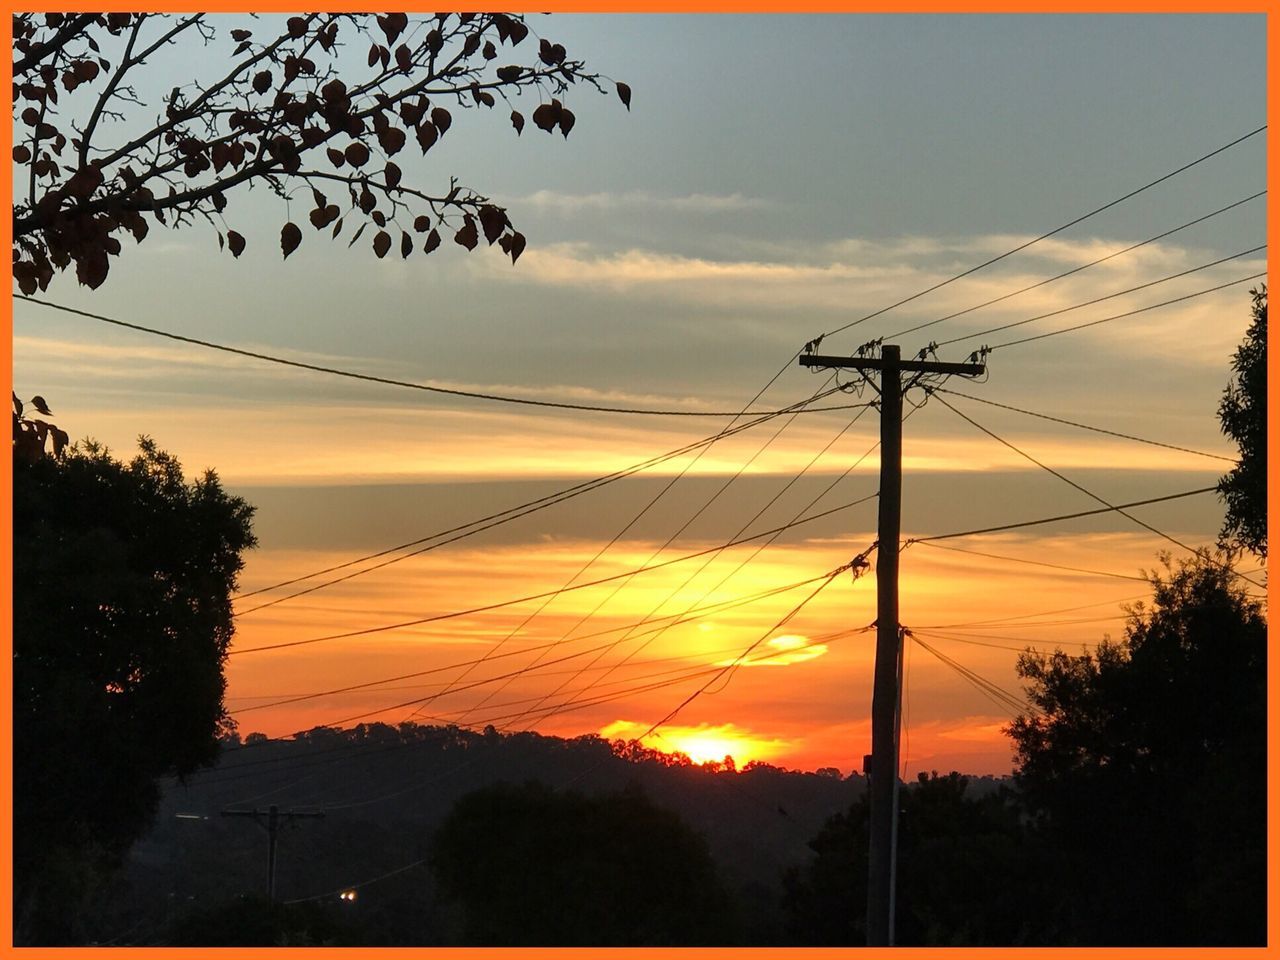 sunset, silhouette, cable, tree, orange color, sky, power line, connection, power supply, nature, beauty in nature, electricity pylon, scenics, no people, electricity, fuel and power generation, tranquil scene, tranquility, outdoors, landscape, low angle view, technology, telephone line, day